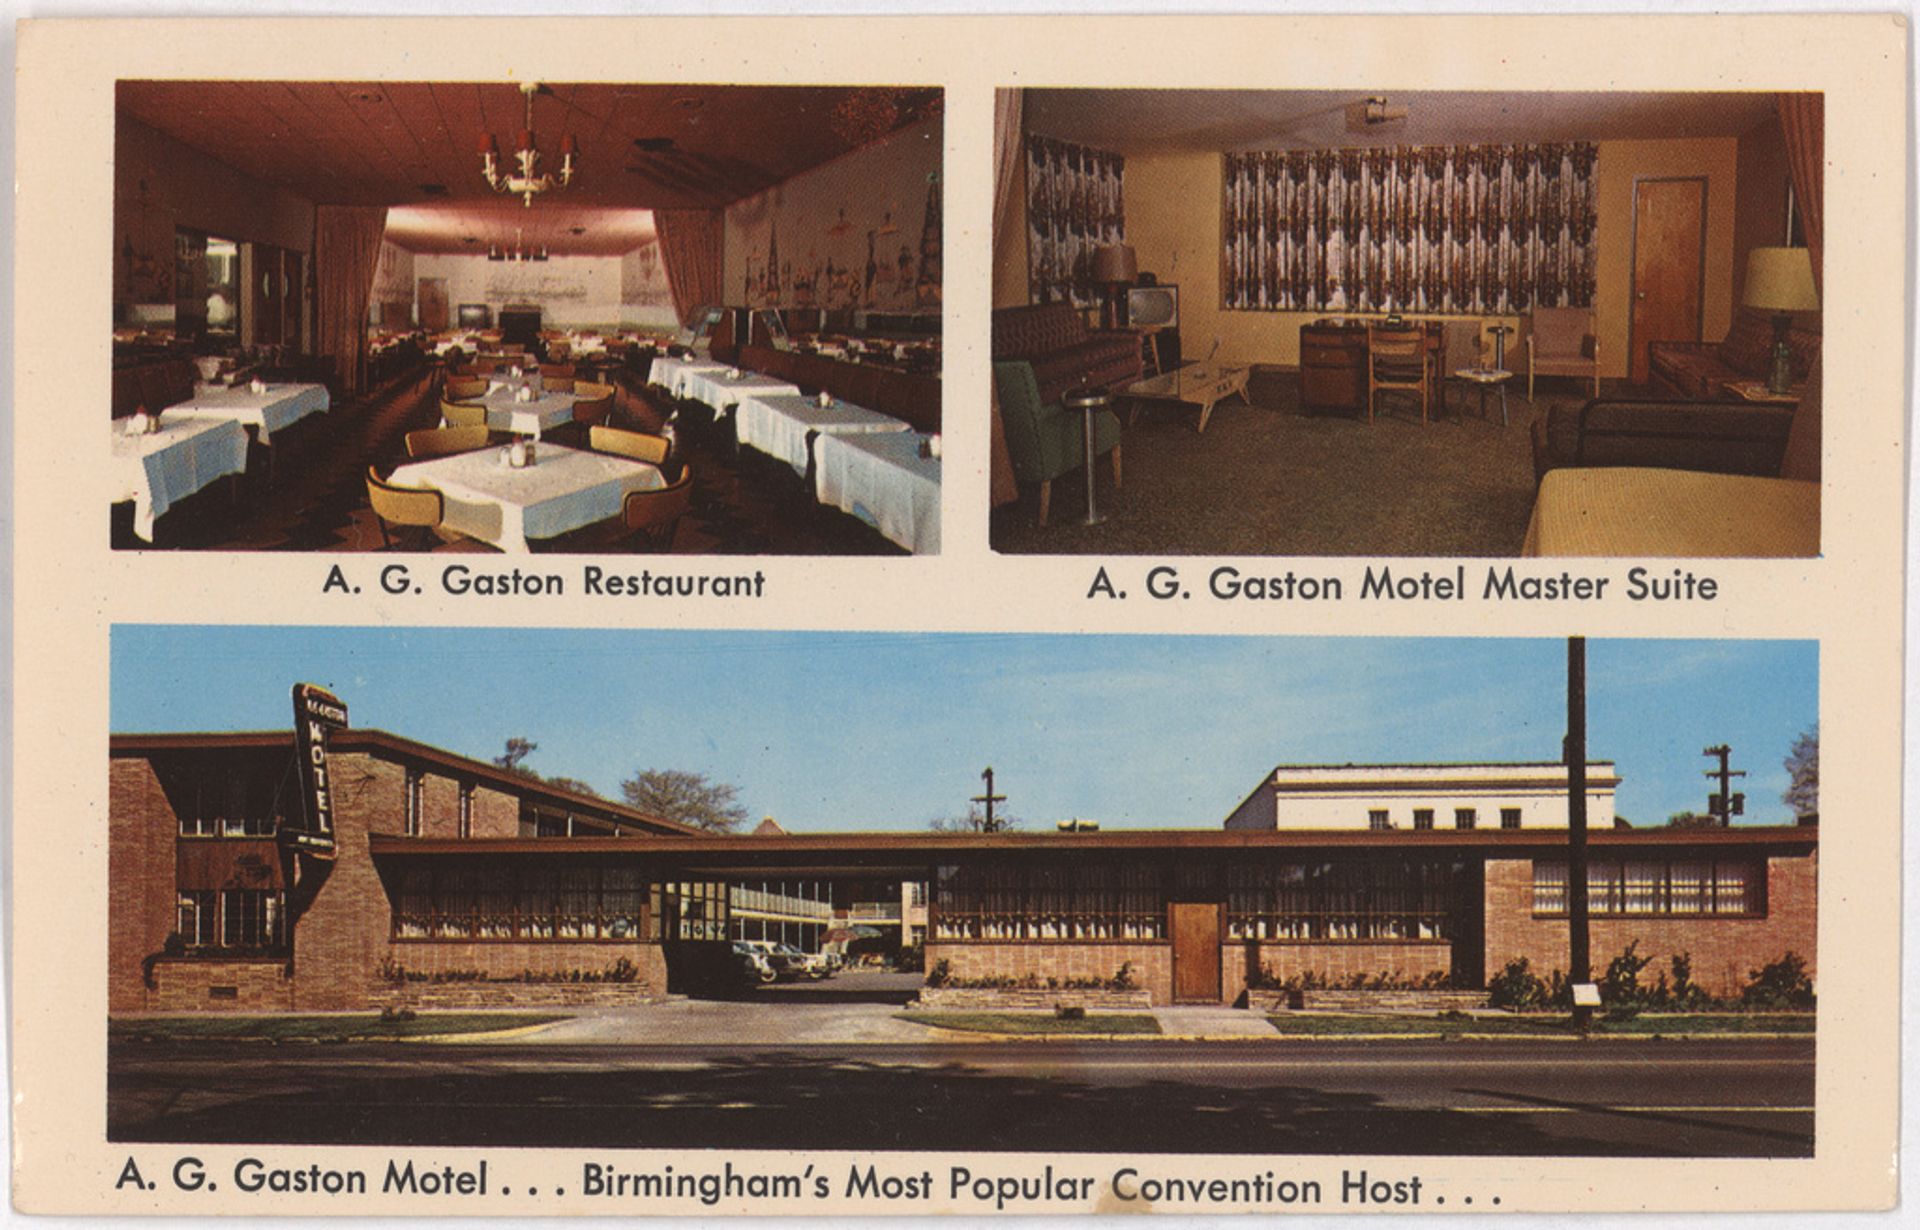 Postcard of the A. G. Gaston Motel in Birmingham, Alabama (around 1960-69) from the book of letters sent to Arthur Shores, prominent attorney and civil rights leader in Birmingham, Alabama (Vol. 2). © Alabama Department of Archives and History.